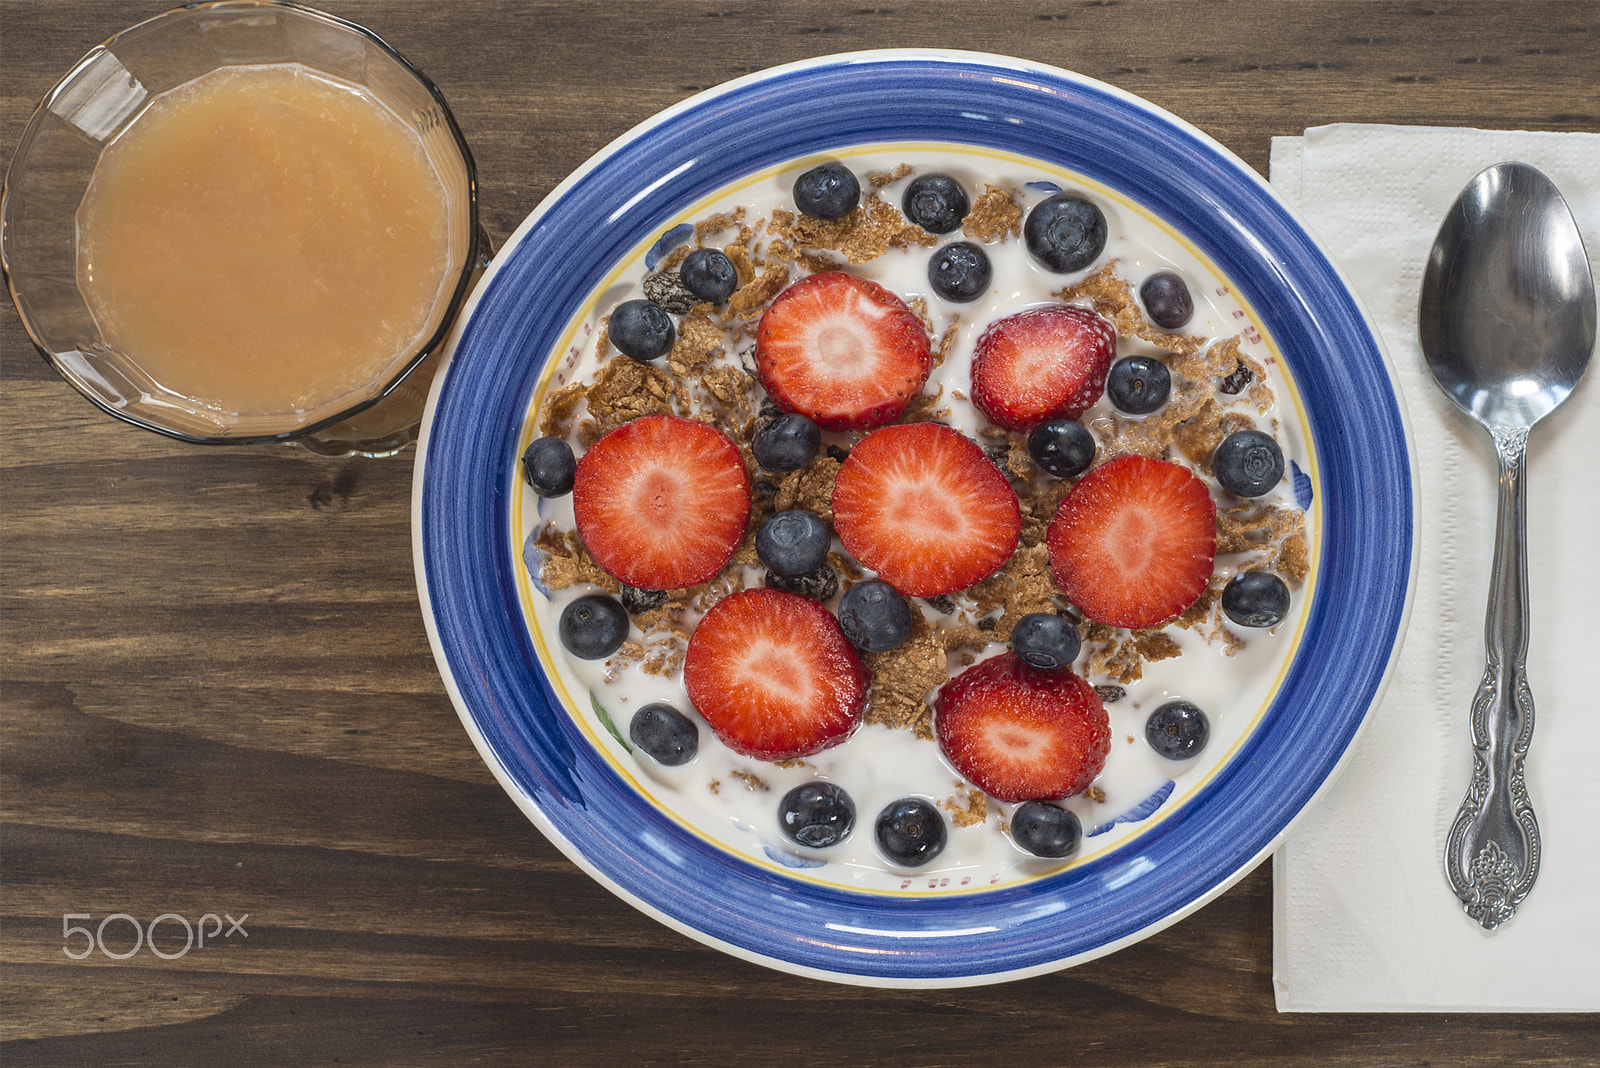 Nikon D800E sample photo. Morning cereal with strawberries photography